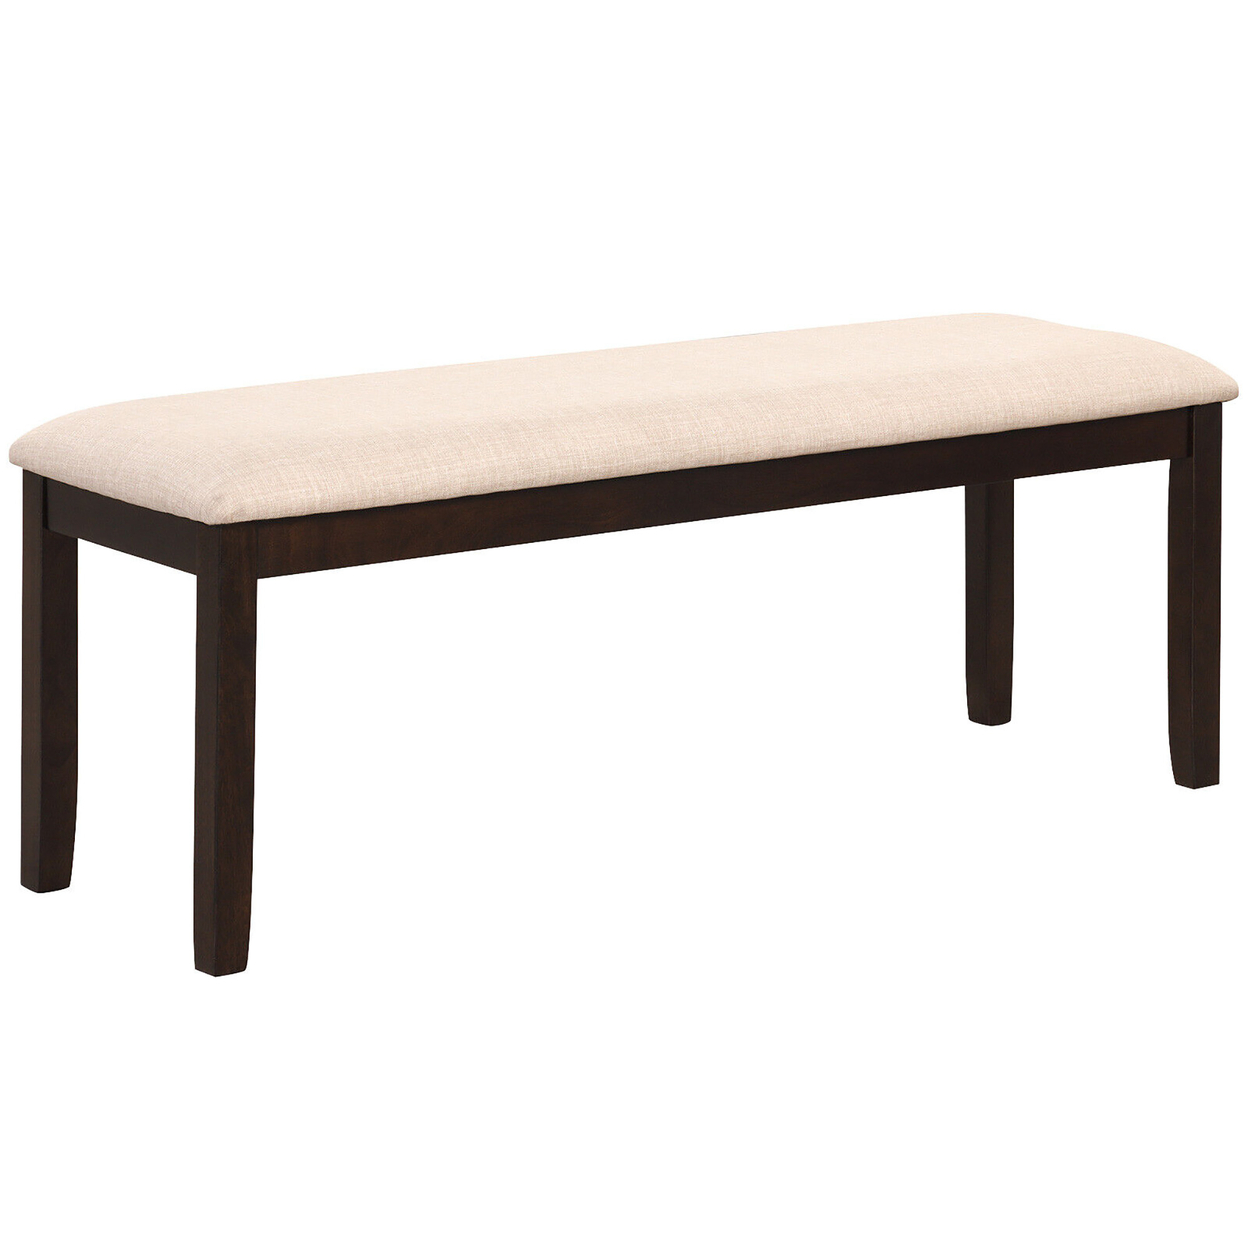 Dining Bench Upholstered Fabric Entryway Bench W/ Padded Seat Kitchen&Living Room